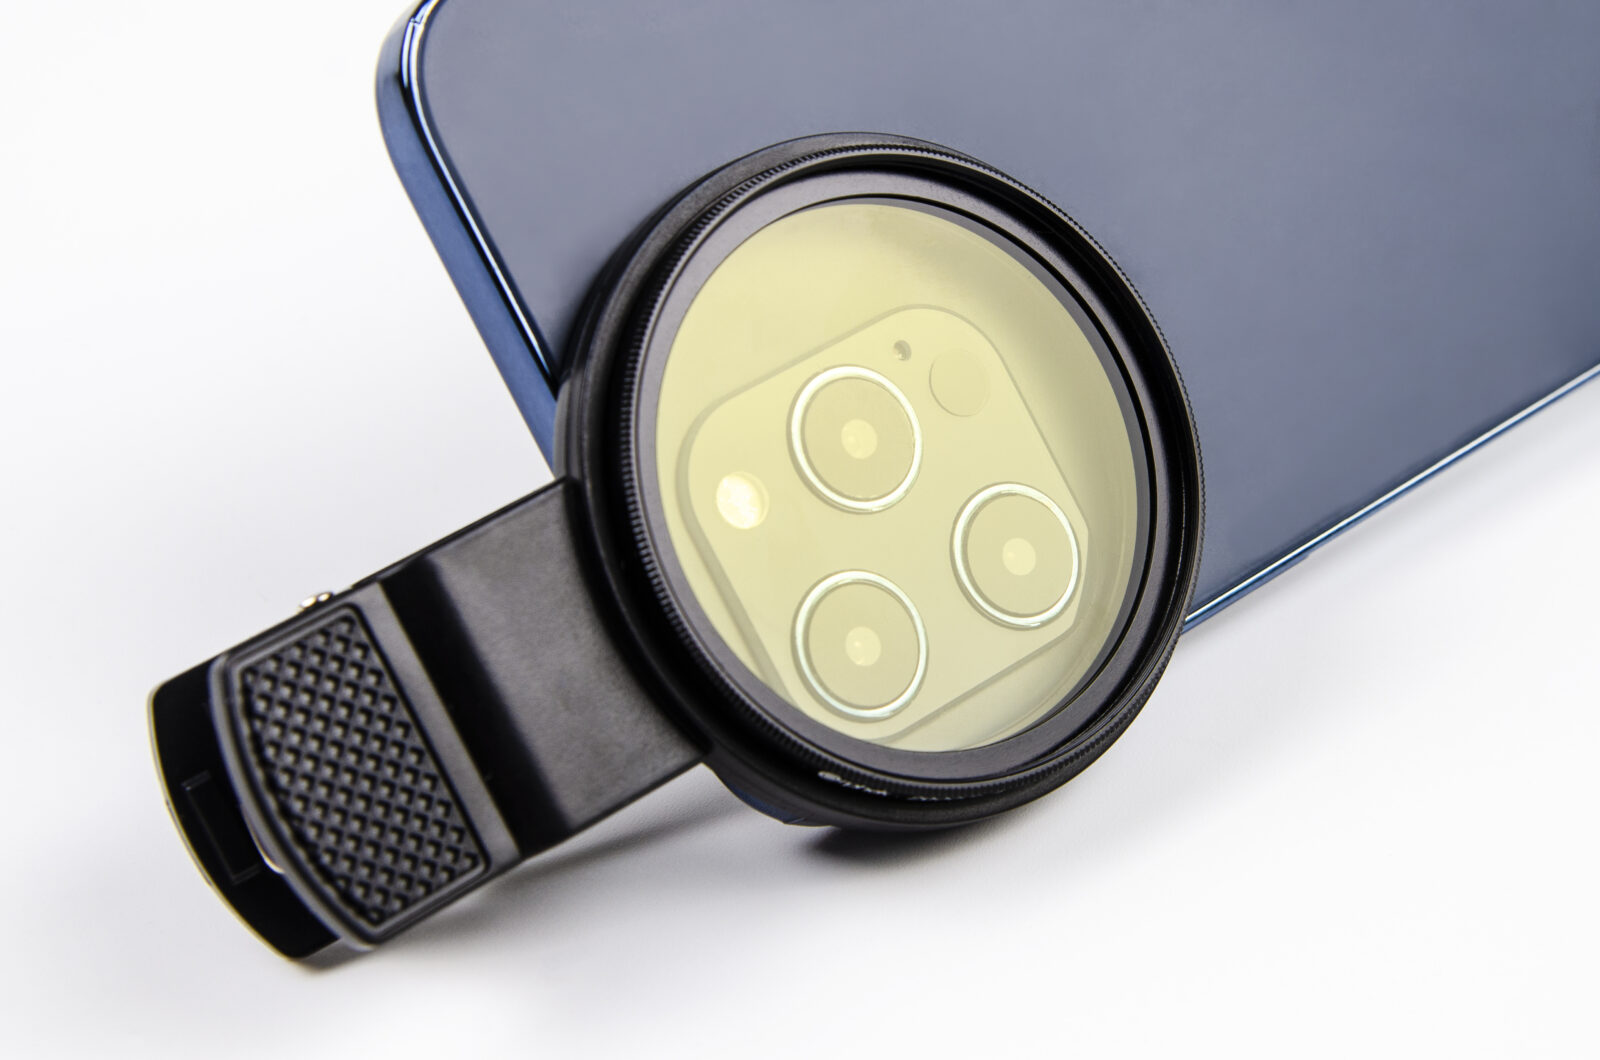 Coral Lens Kit brings new extra wider lens of 52 mm